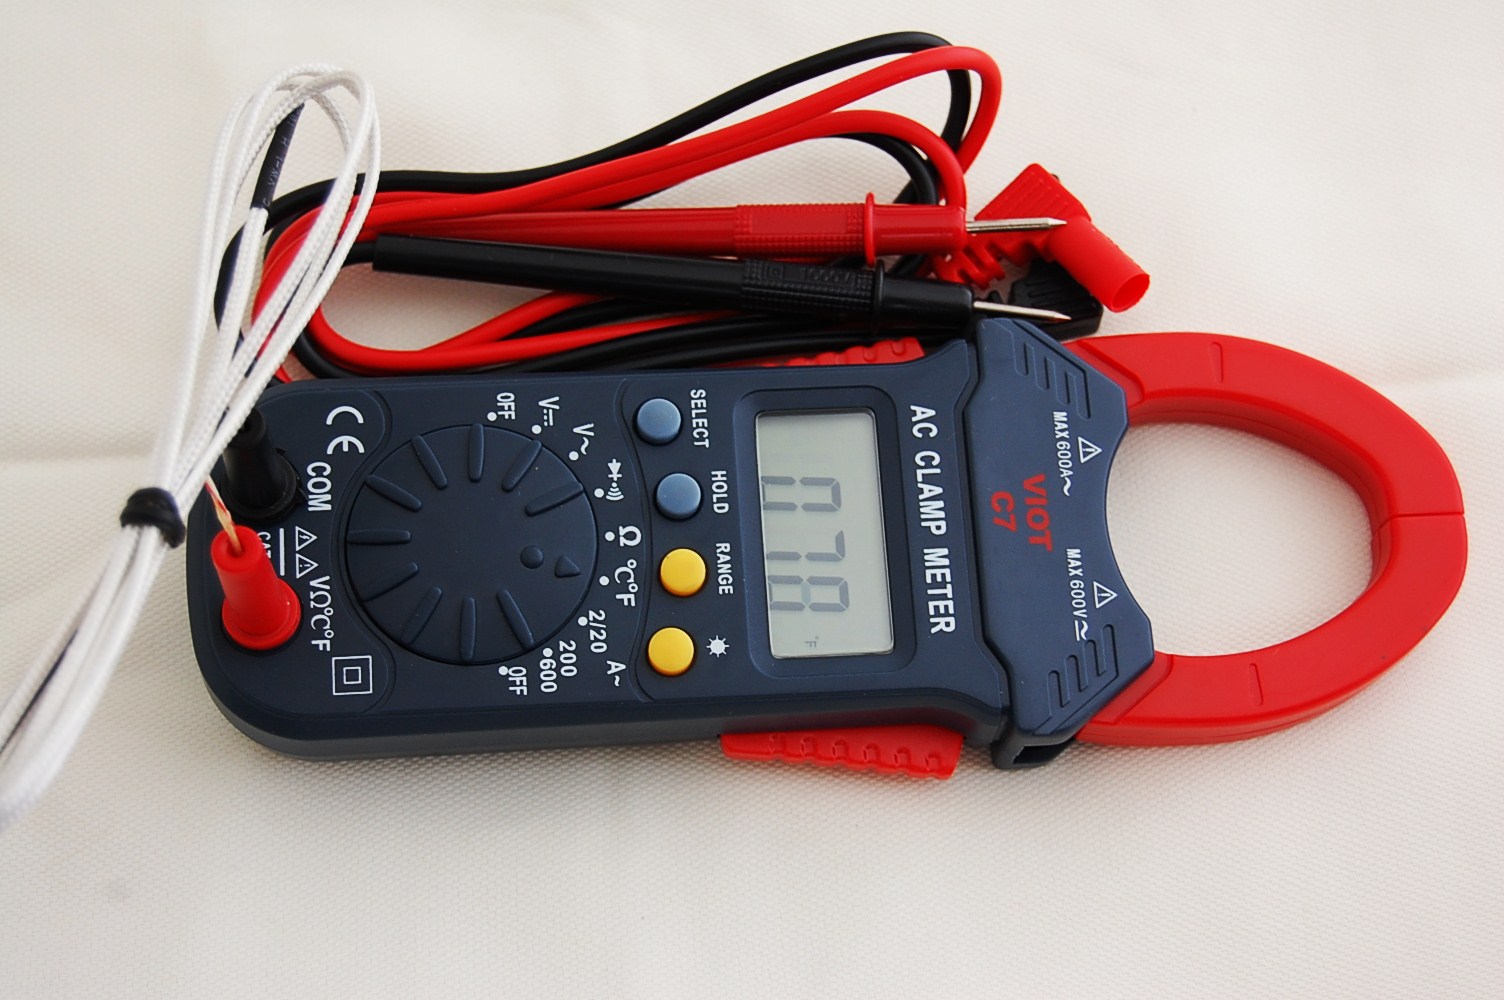 C7:Digital Clamp Meter Ammeter DMM Multimeter with K Type Thermocouple